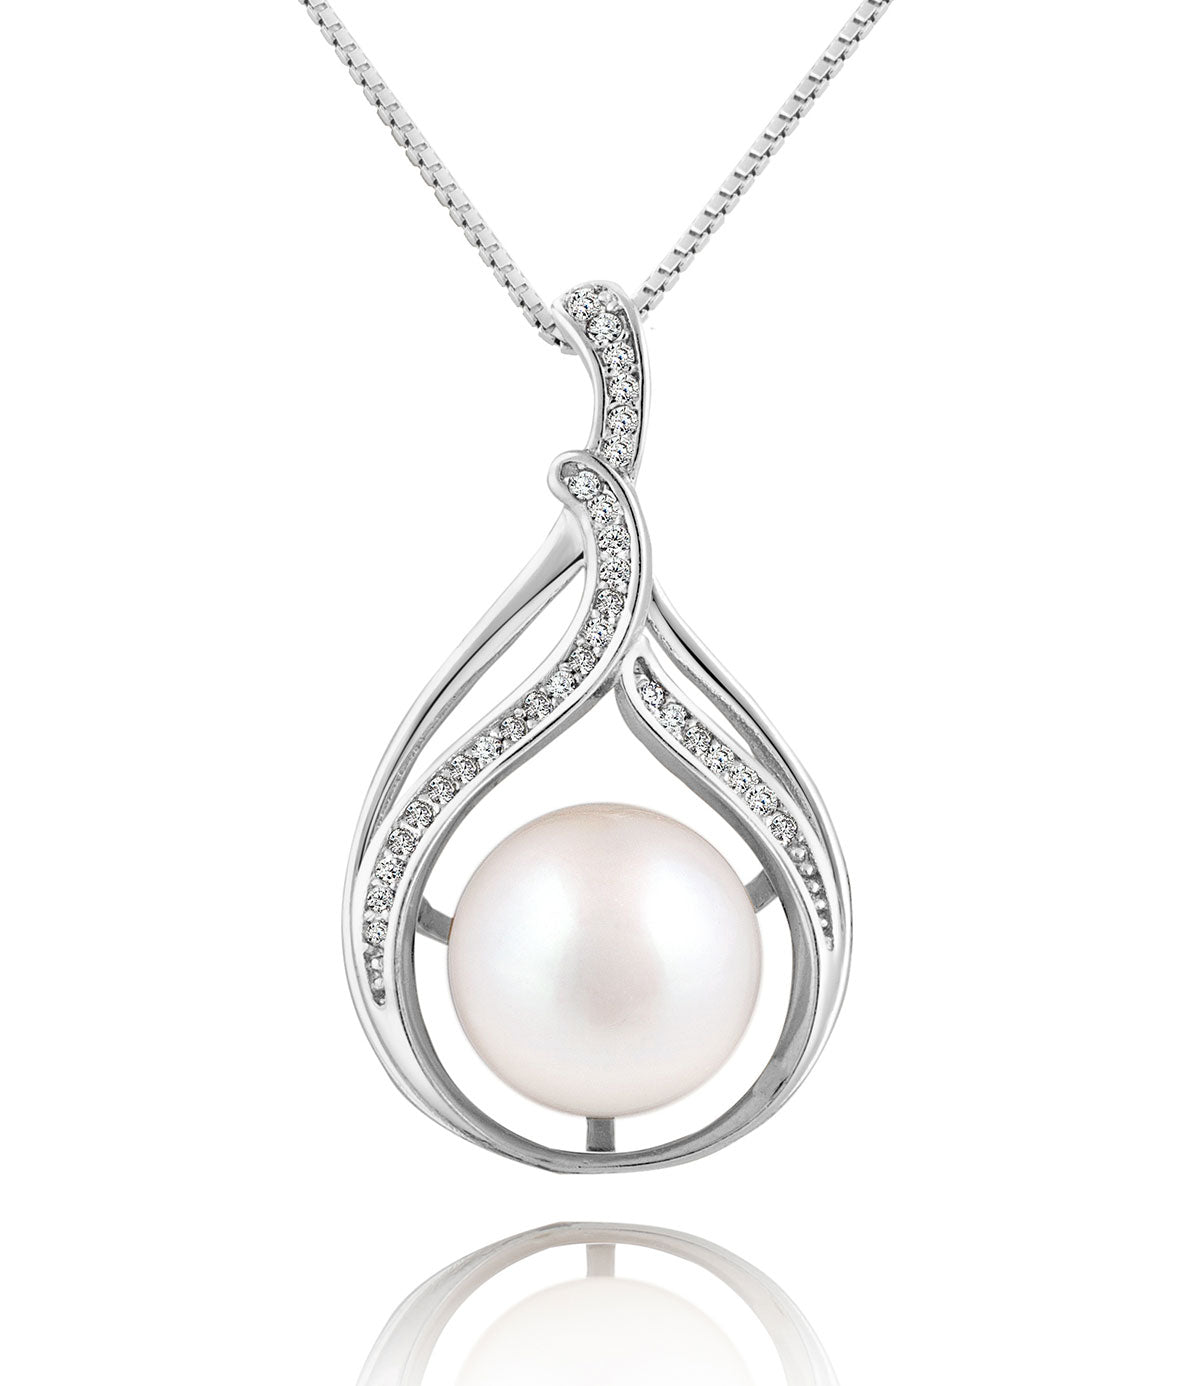 Freshwater Pearl Pendant Necklace in Sterling Silver